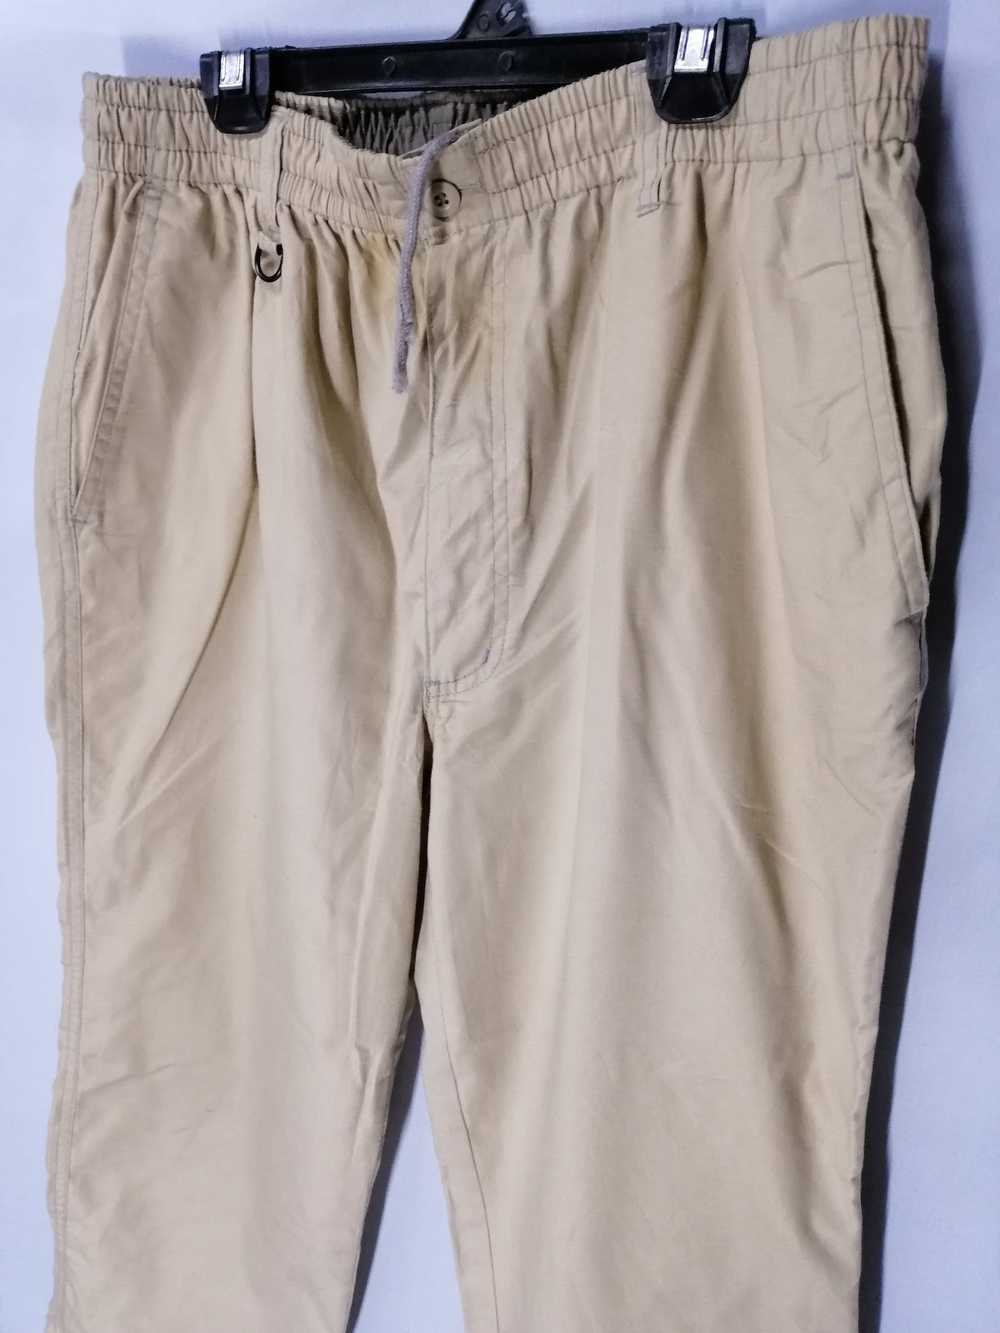 Japanese Brand First Down Crop Pant - image 2